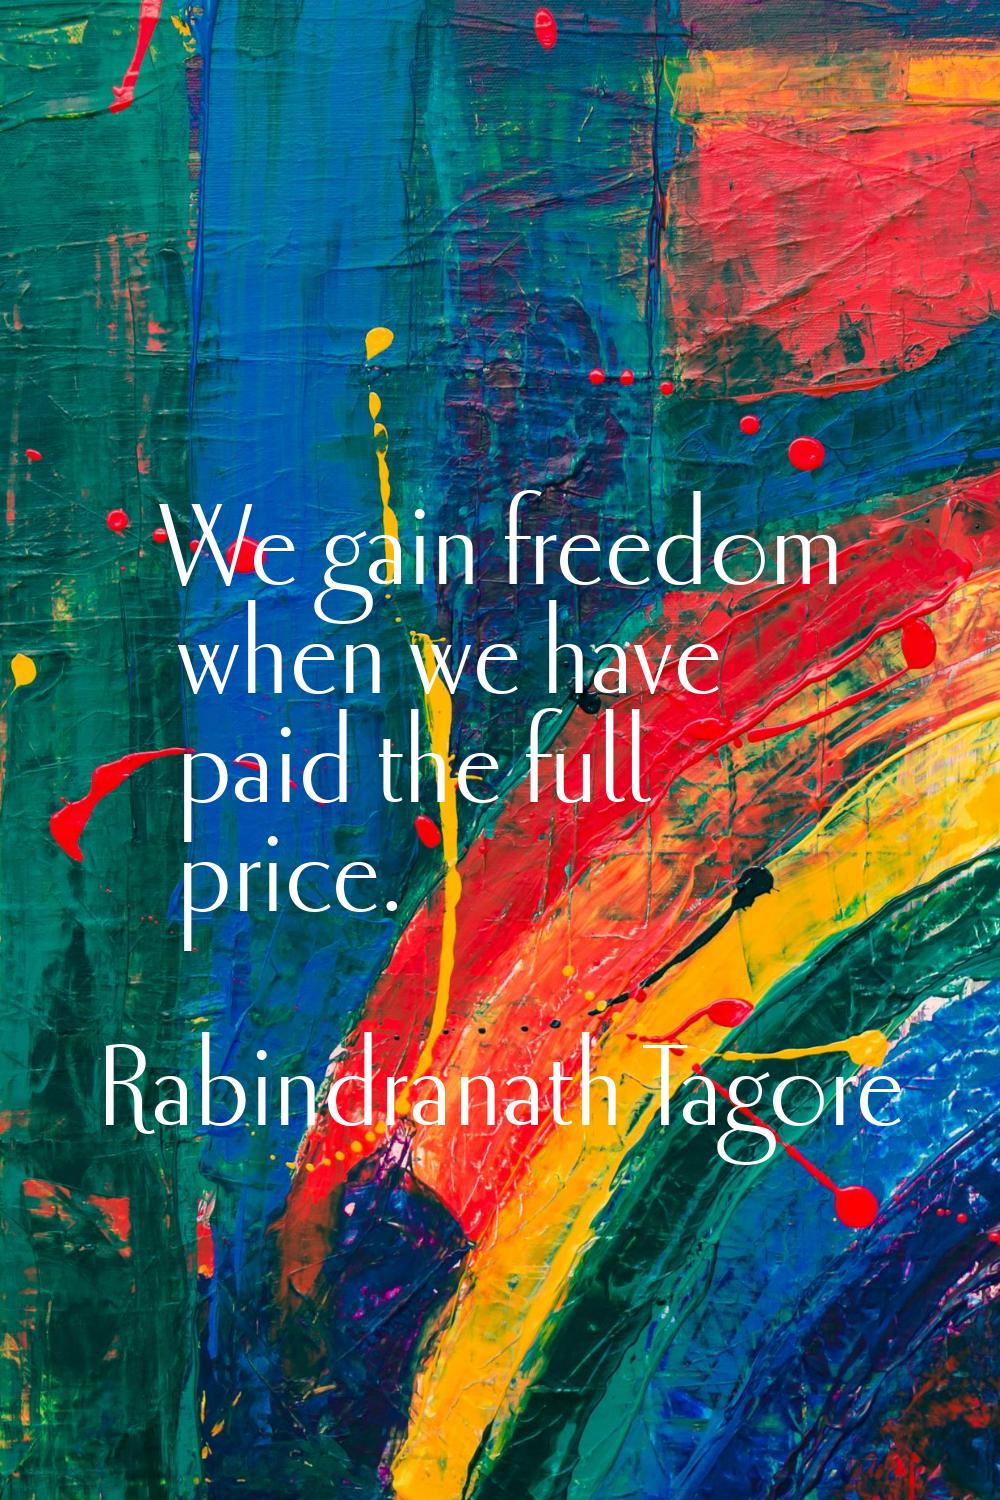 We gain freedom when we have paid the full price.